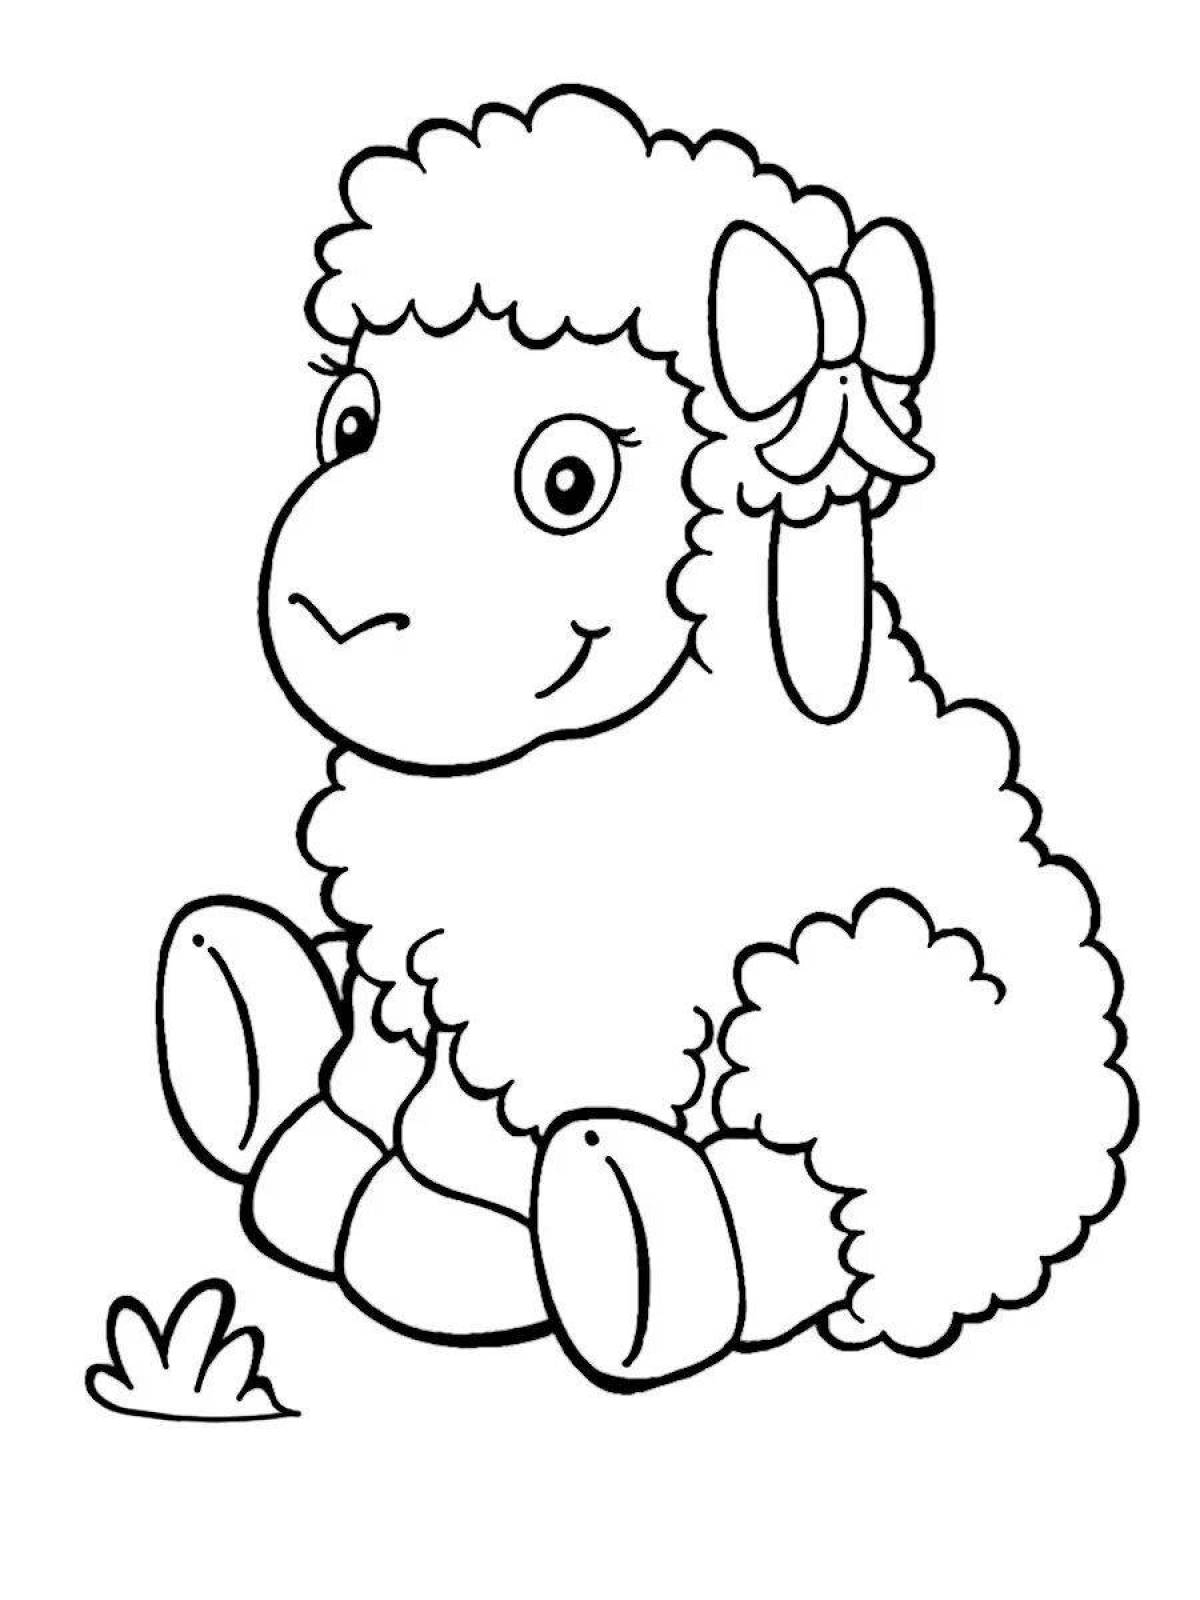 Fantastic sheep coloring book for 4-5 year olds